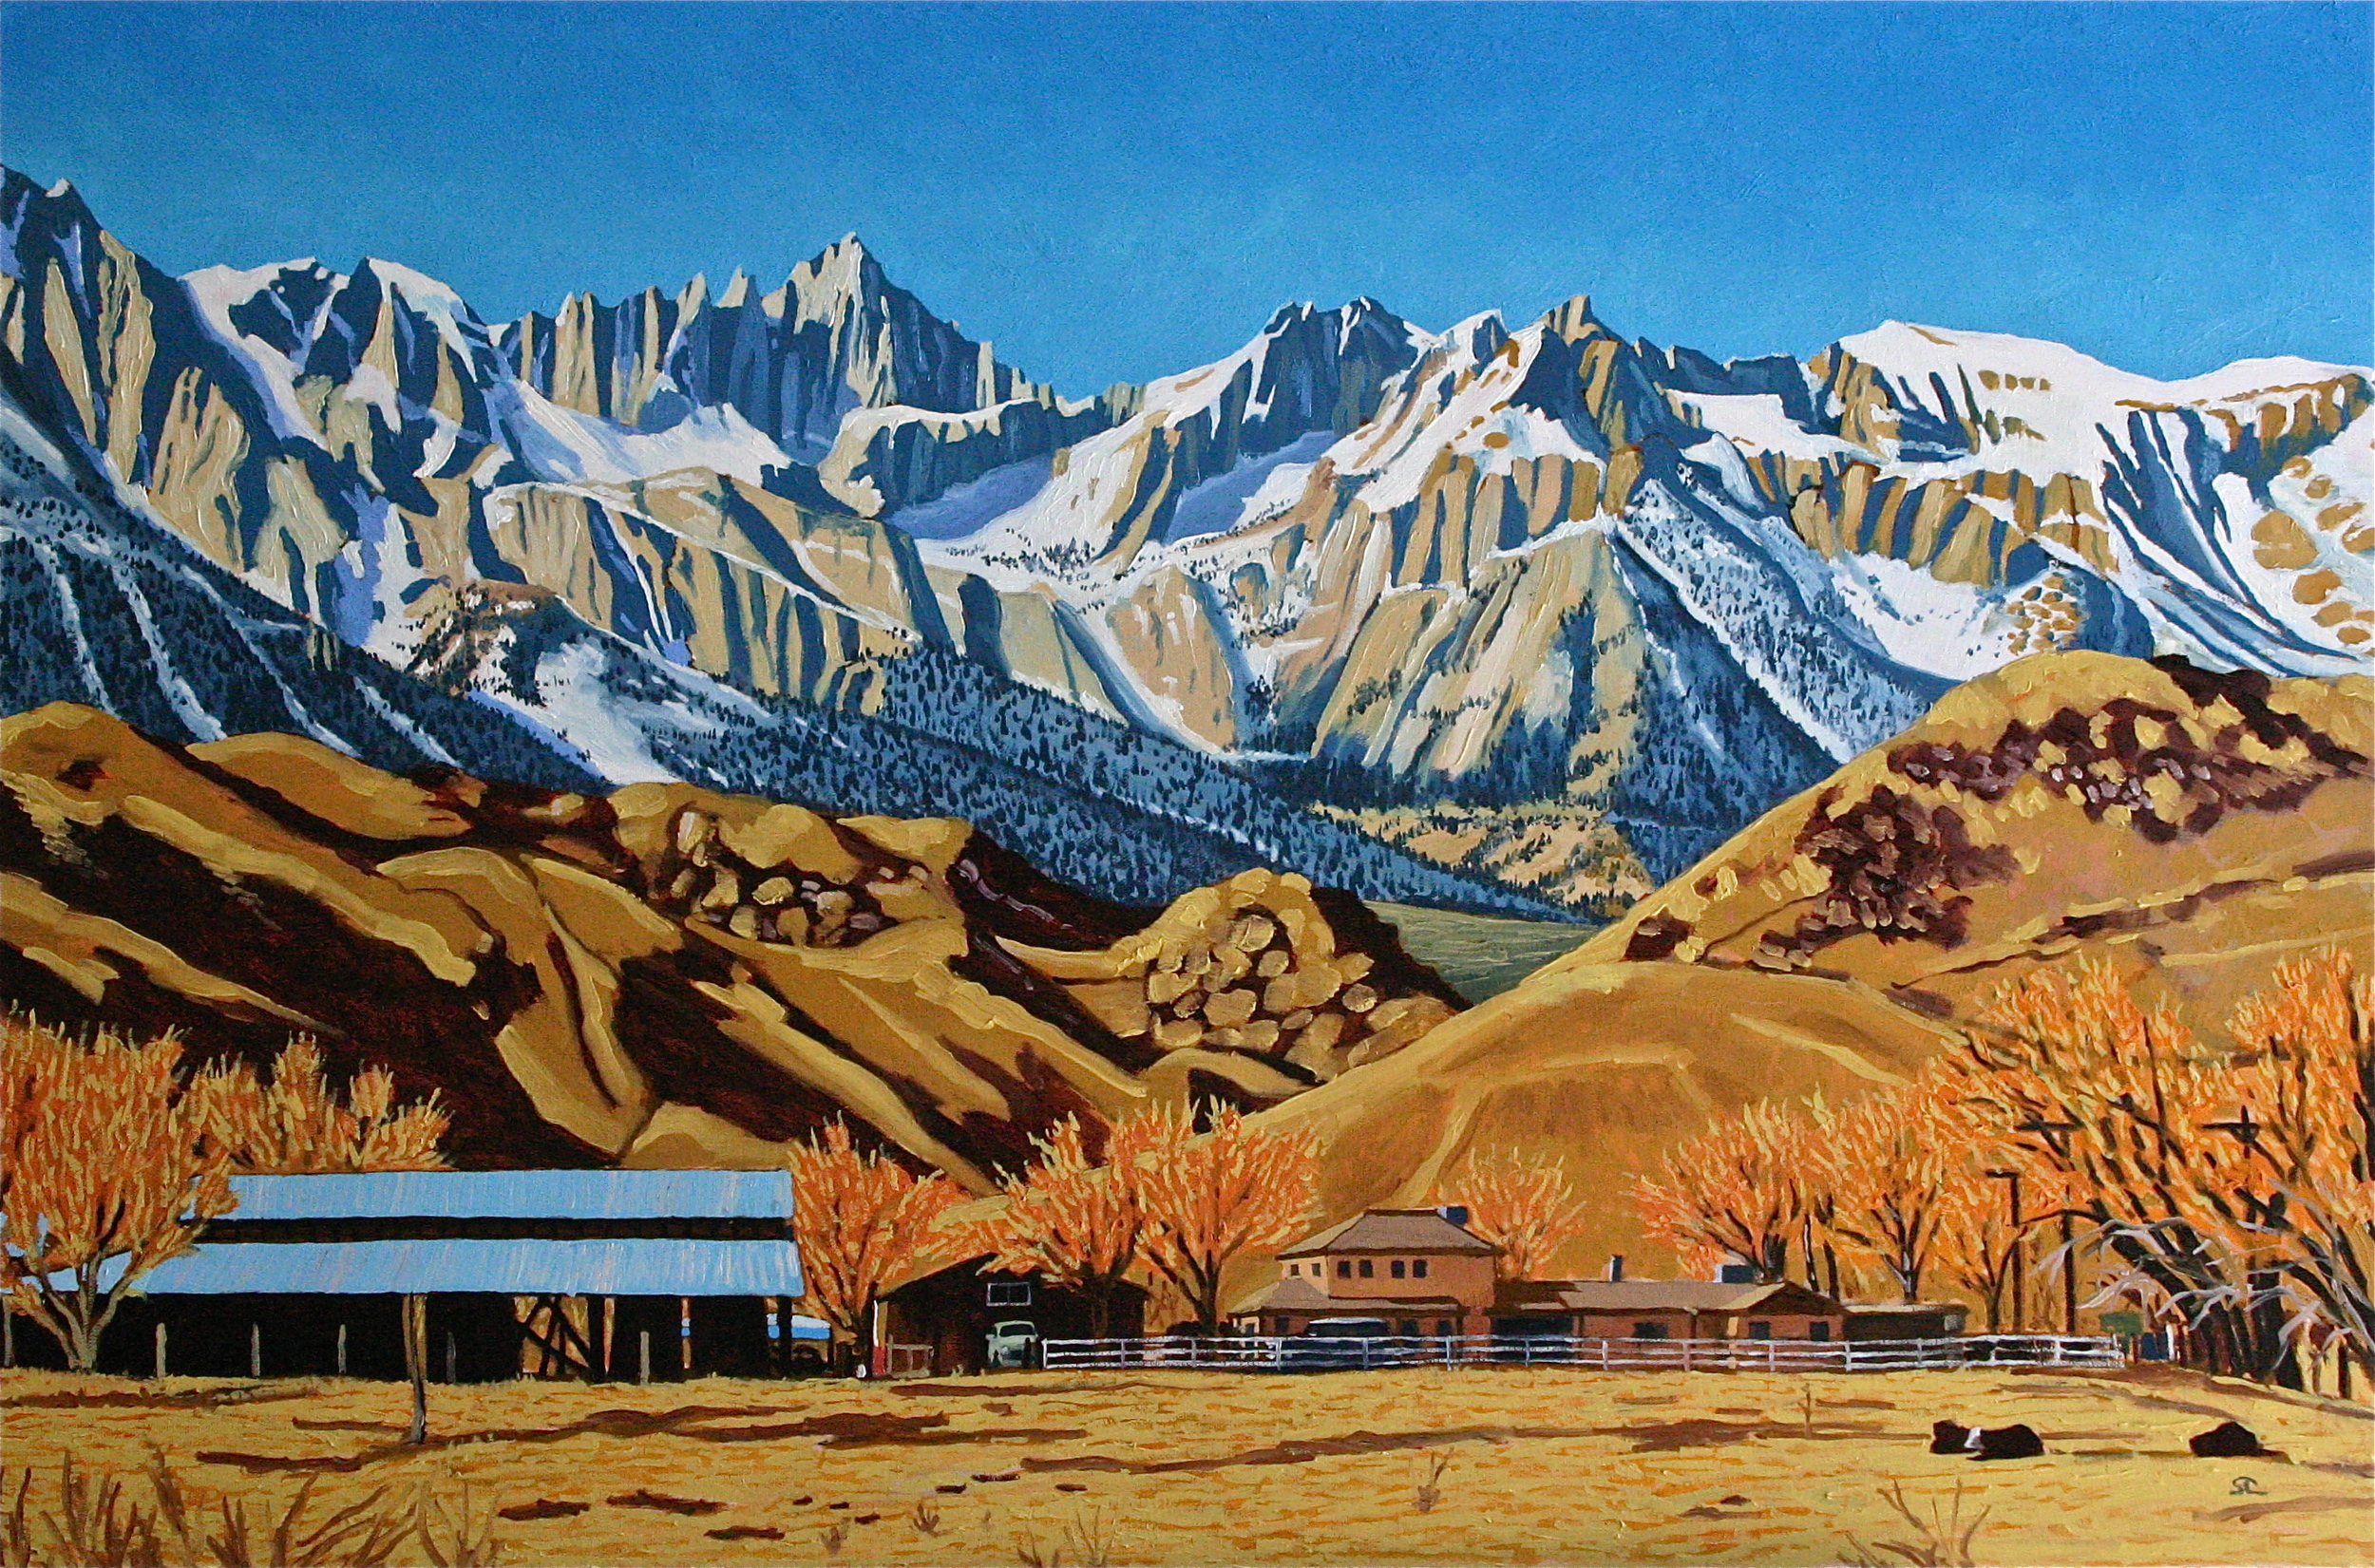 "Mount Whitney" oil on canvas 24 x 36 sold